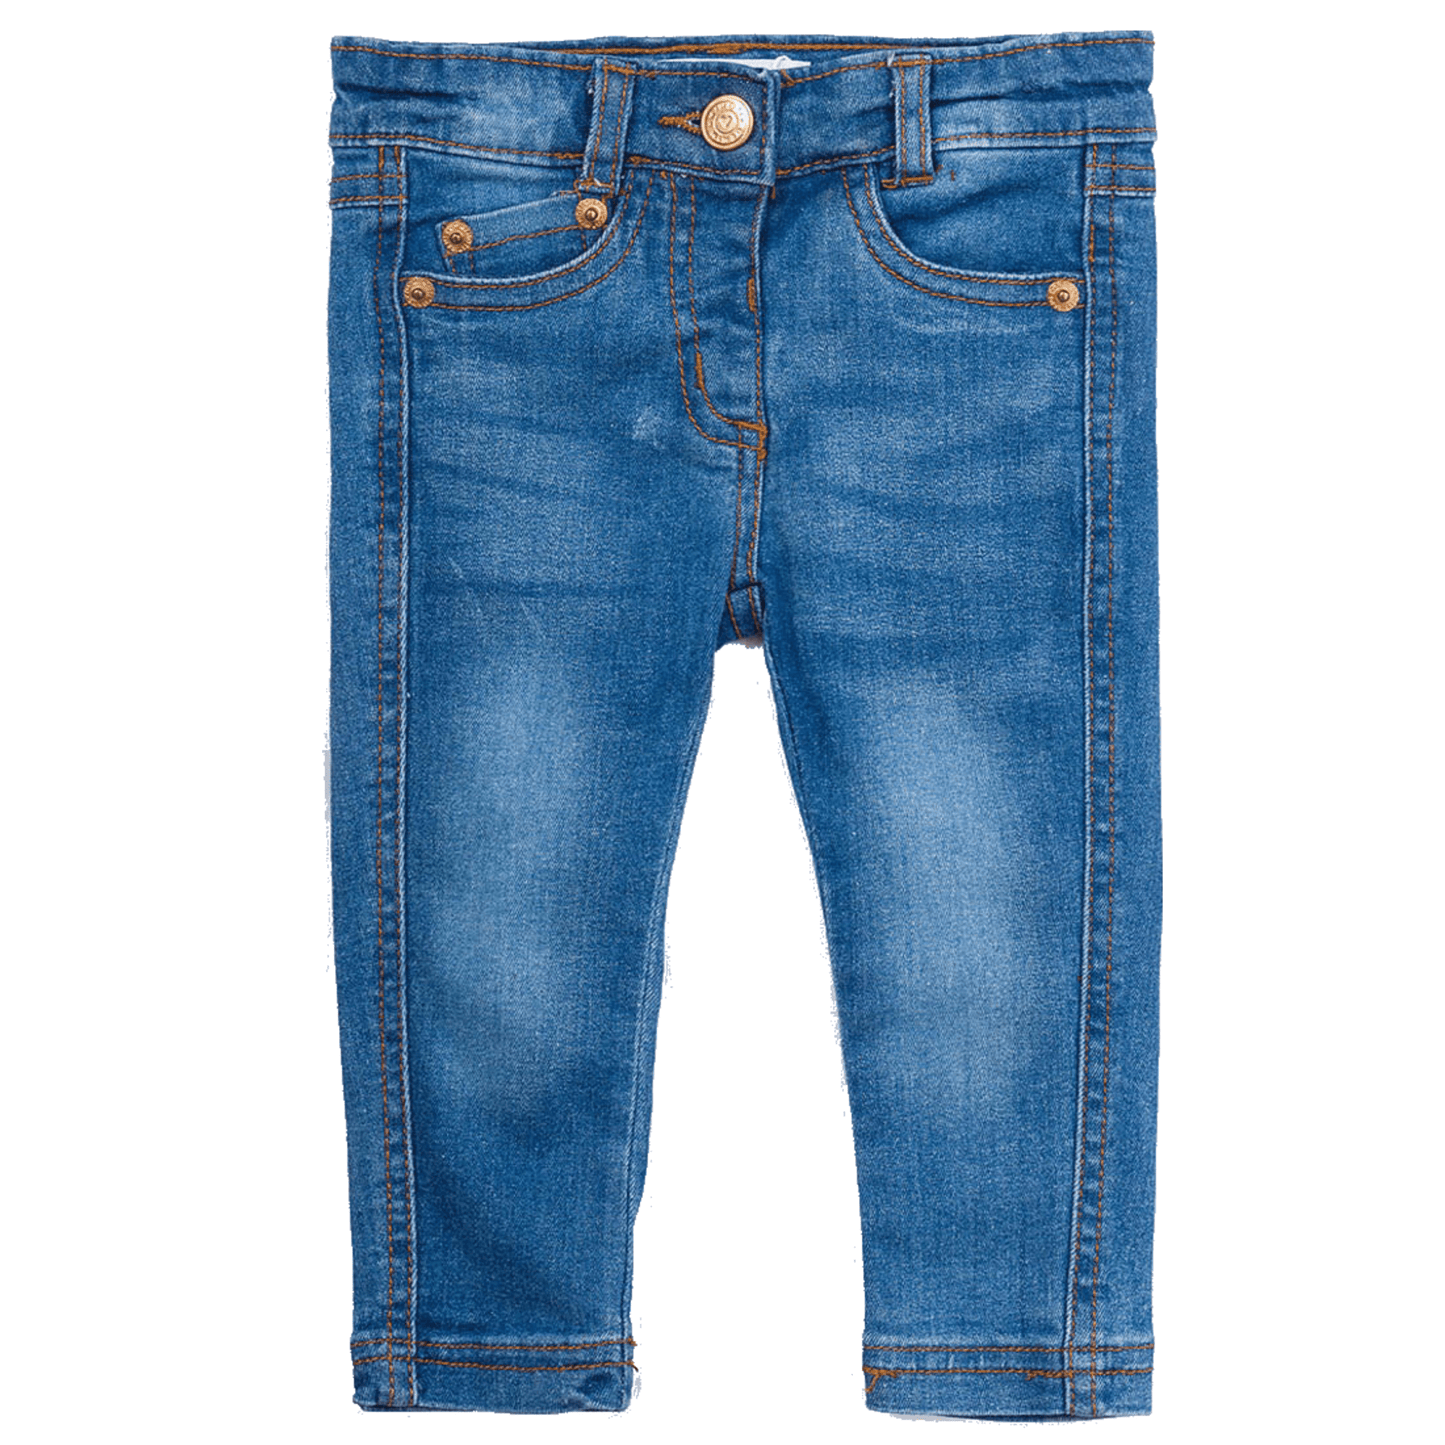 Boys Slim Fit Jeans | Oscar & Me | Baby & Children’s Clothing & Accessories